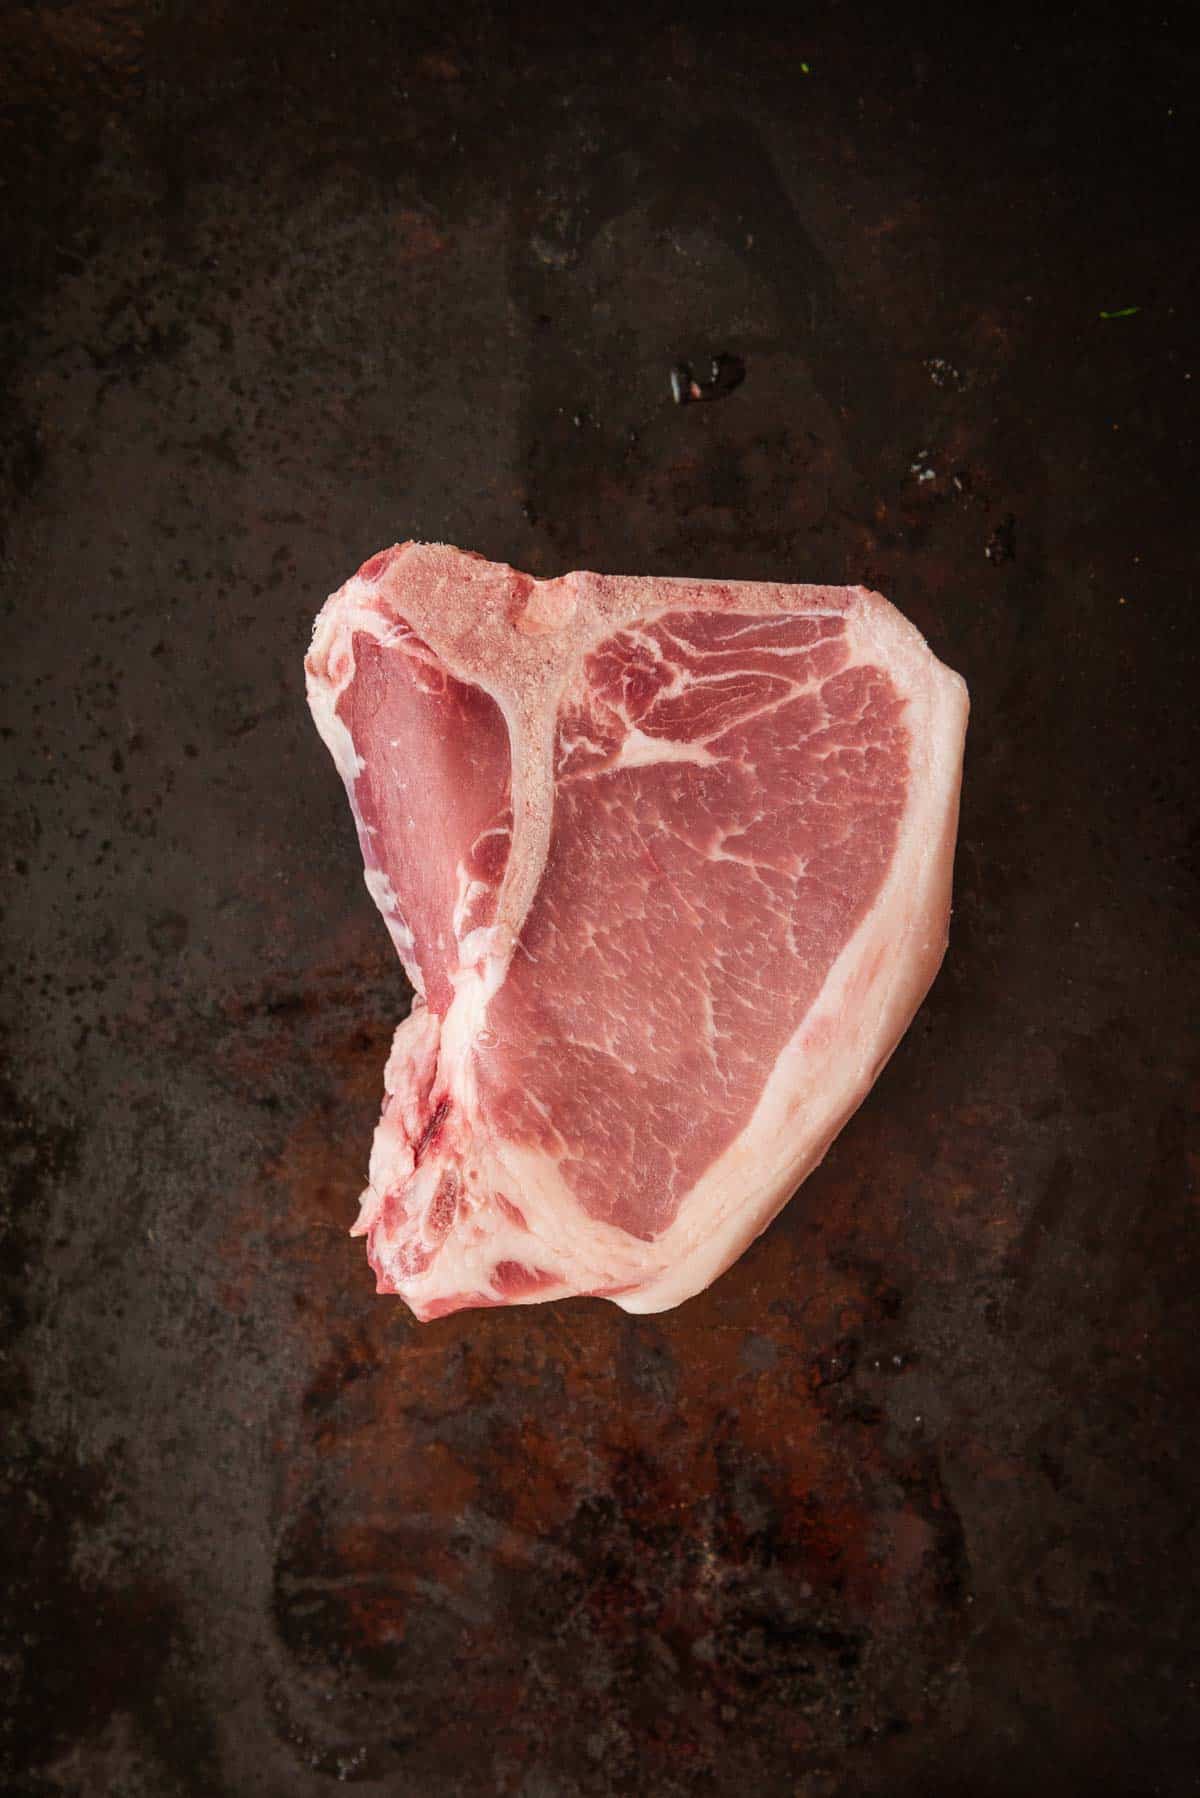 A piece of meat is sitting on a black surface.